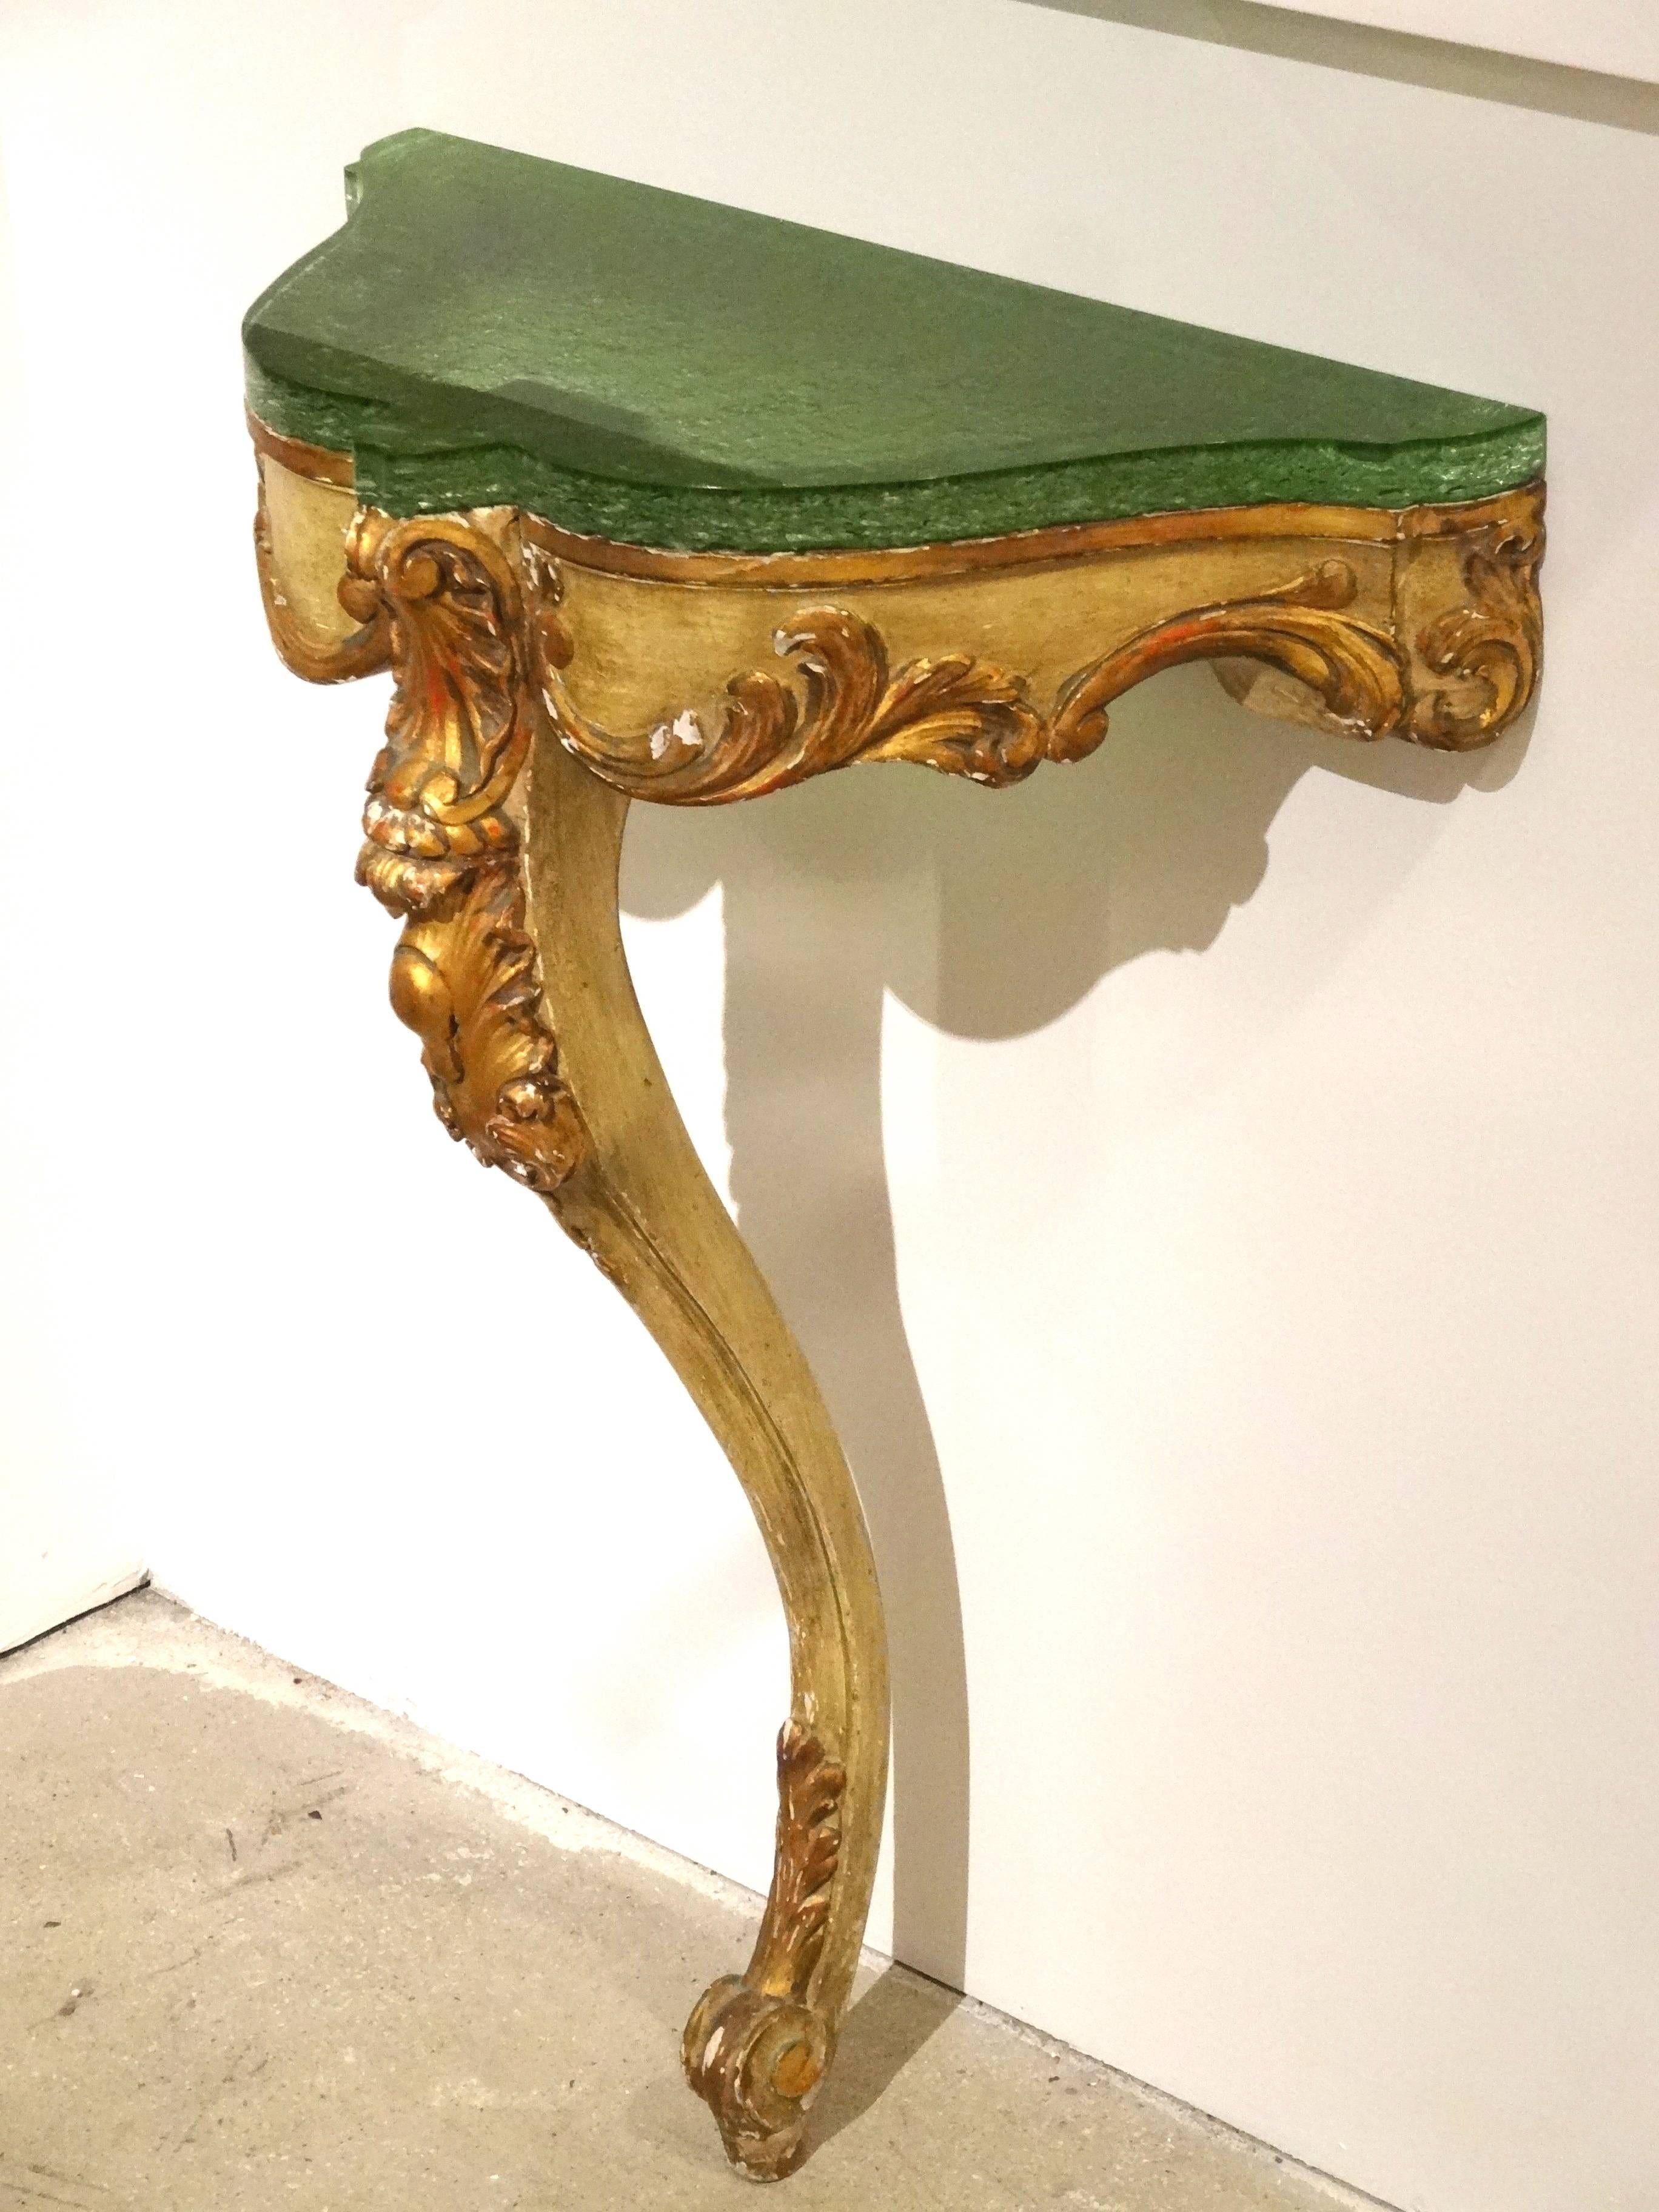 A beautifully aged painted and gilded console with a new modern custom Lucite top.
Nicely carved details which are highlighted by the gilding.
The modern colored Lucite slab add a bit of modern complimenting the classic form.